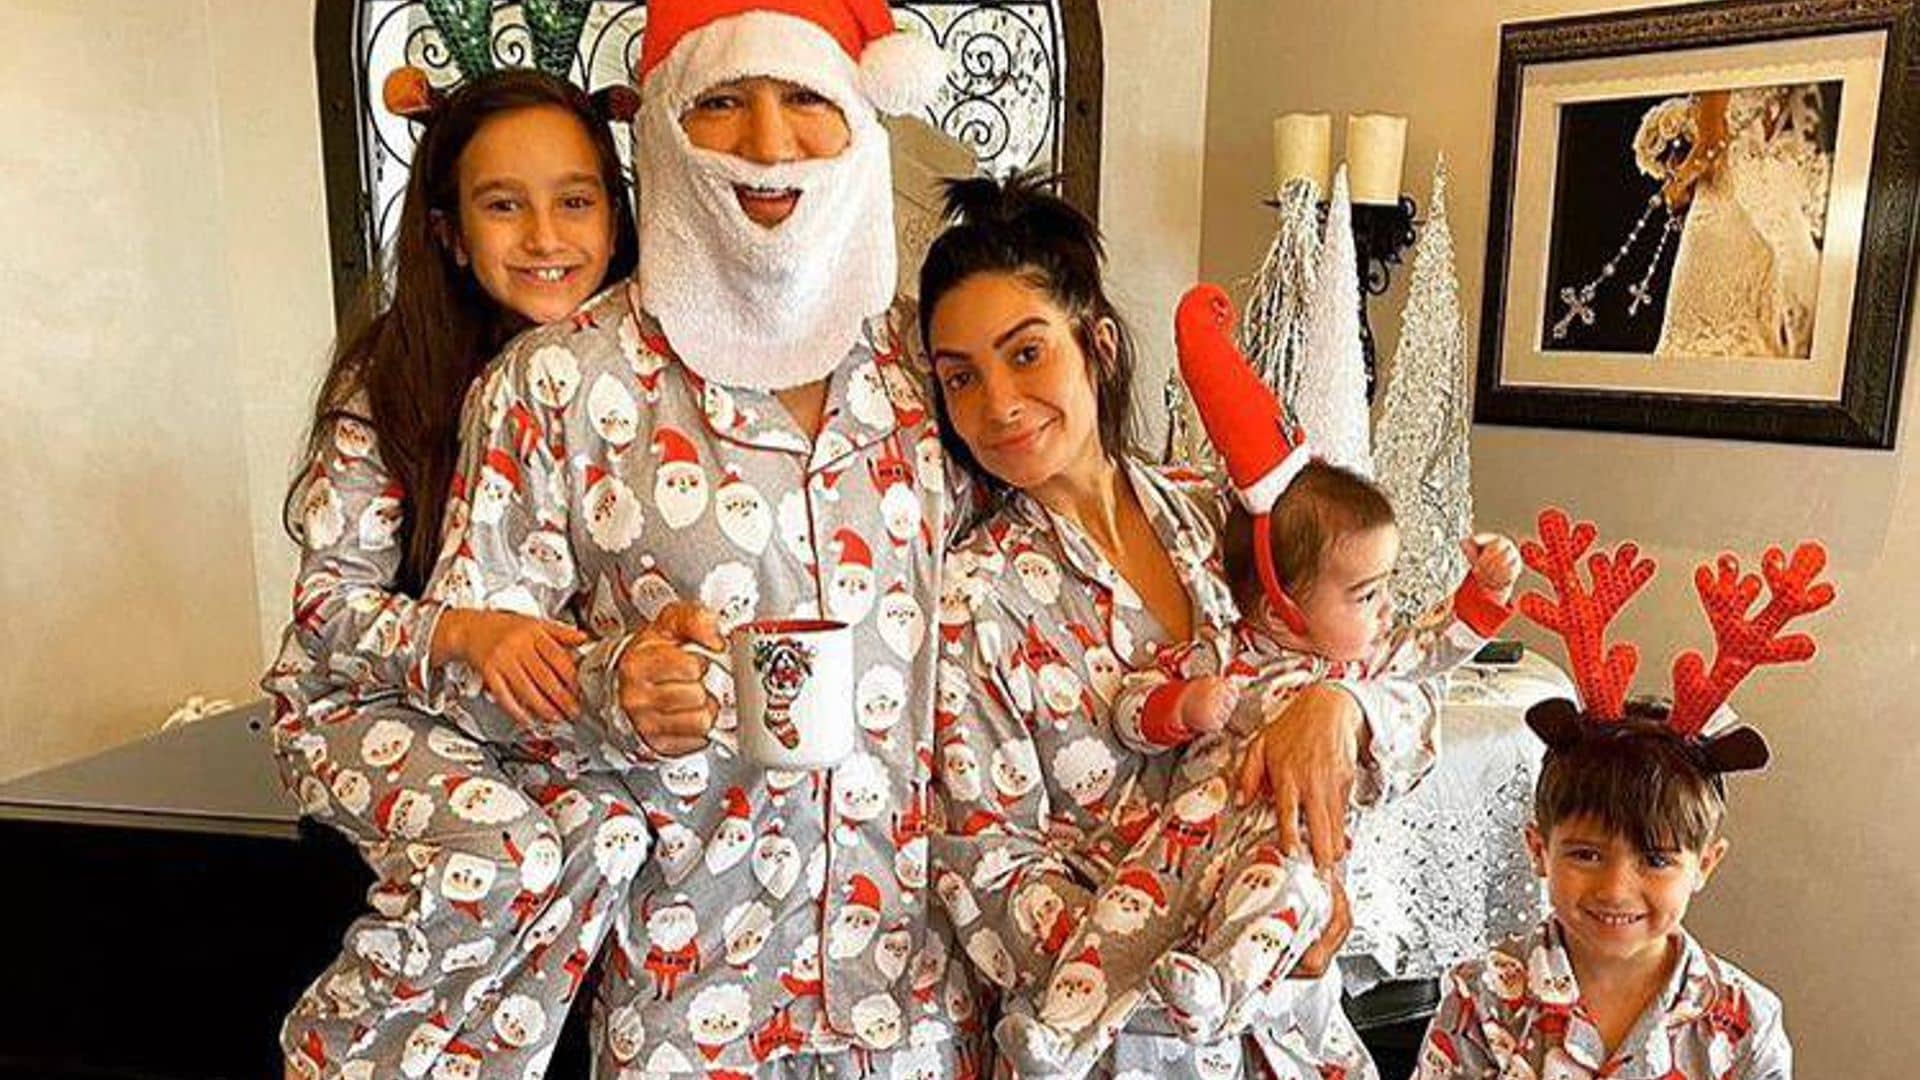 Mario Lopez shares behind-the-scenes video of his children secret Christmas talent